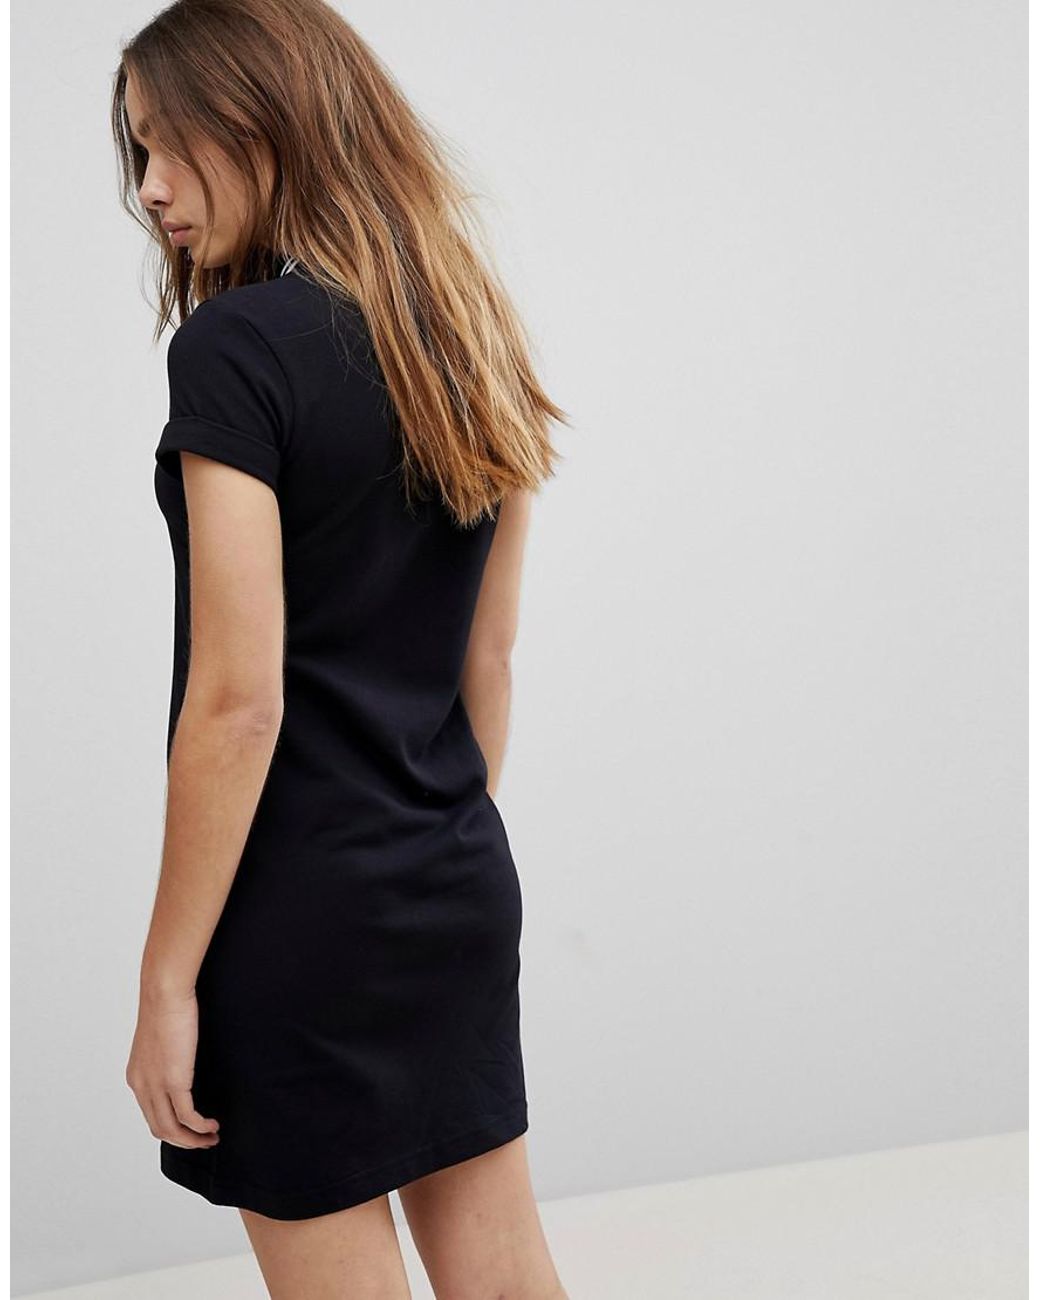 Fred Perry Amy Winehouse Foundation Polo Dress With Heart Embroidery in  Black | Lyst